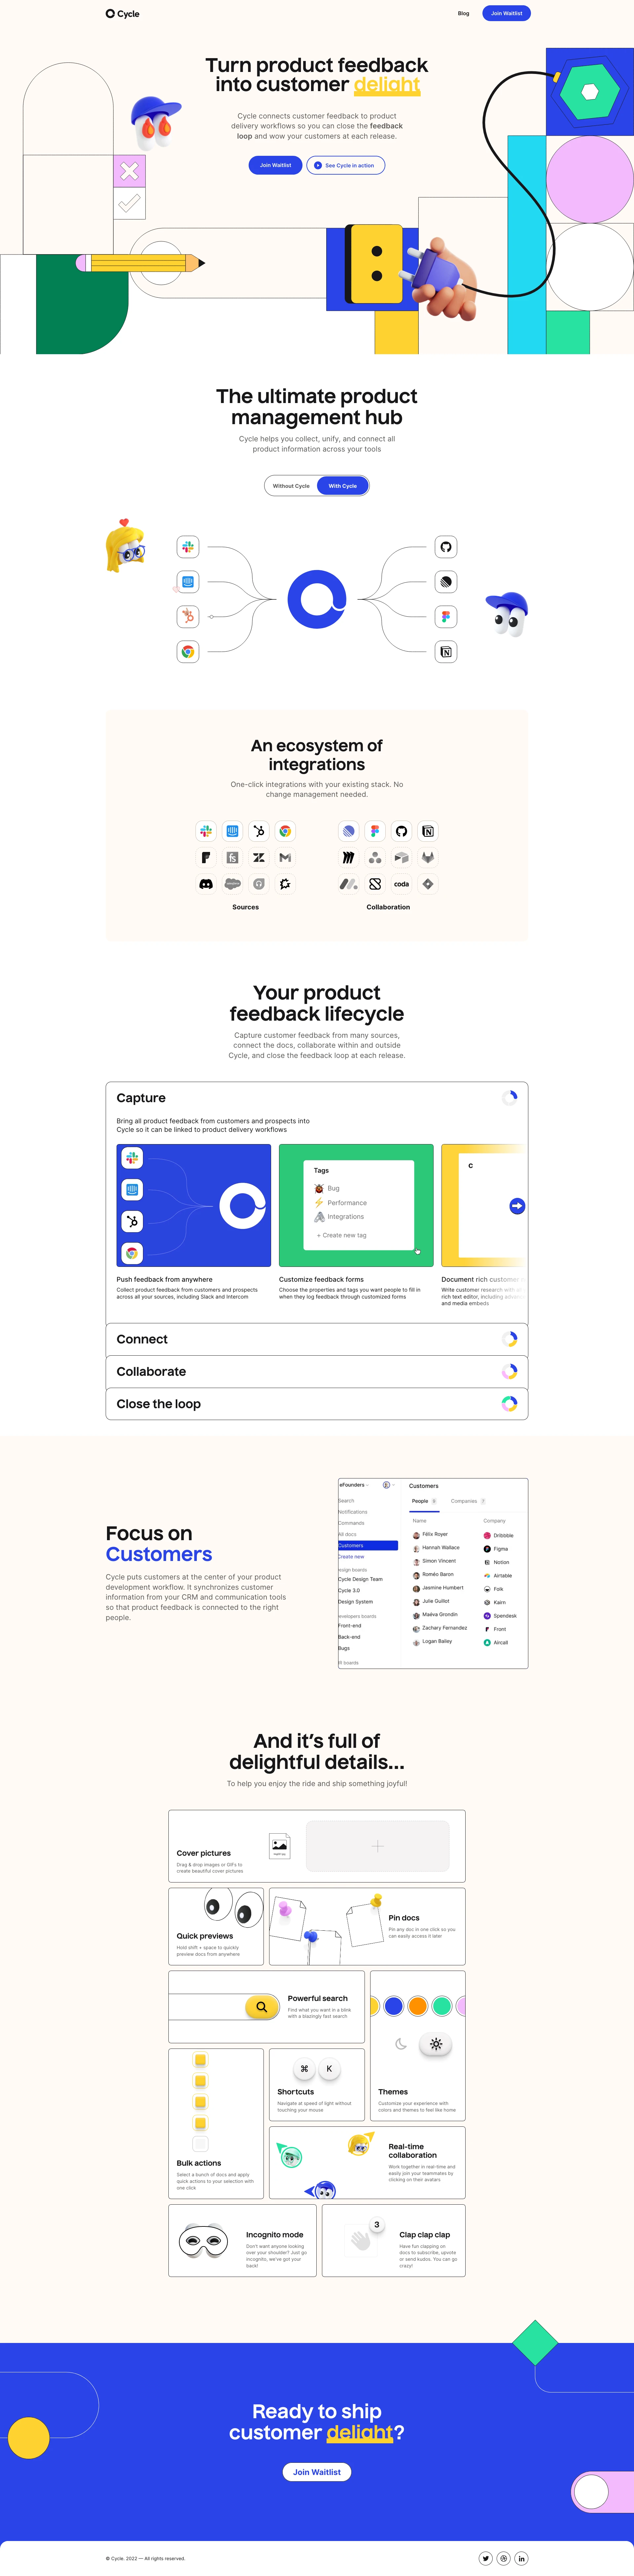 Cycle Landing Page Example: Cycle connects customer feedback to product delivery workflows so you can close the feedback loop and wow your customers at each release.